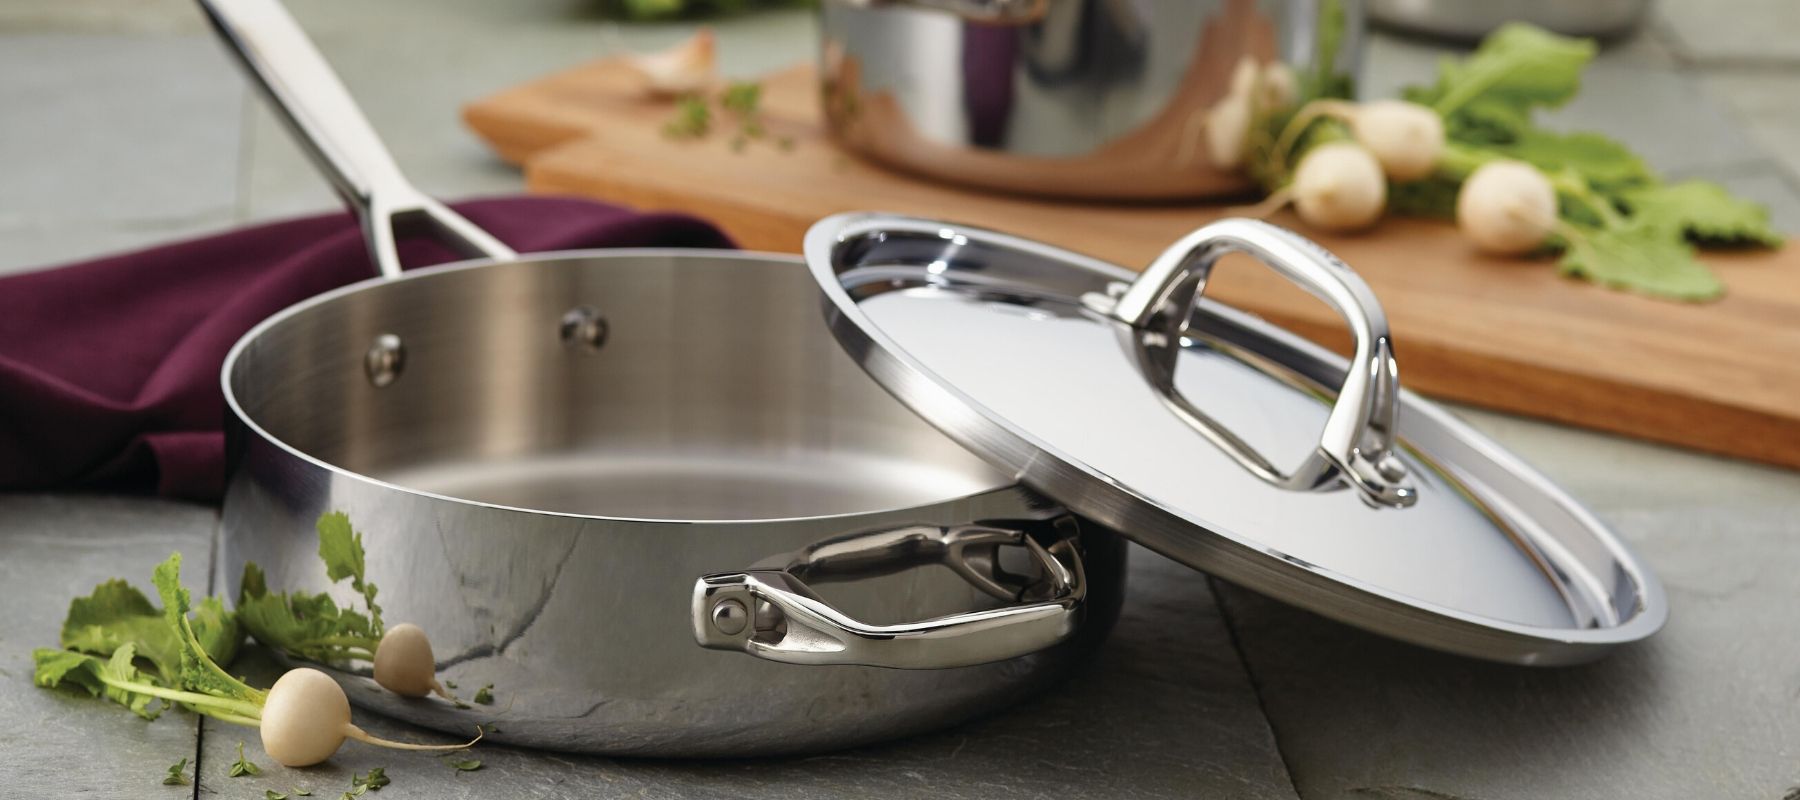 Anolon Tri-Ply Stainless Steel Cookware Set - Bed Bath & Beyond - 17761835